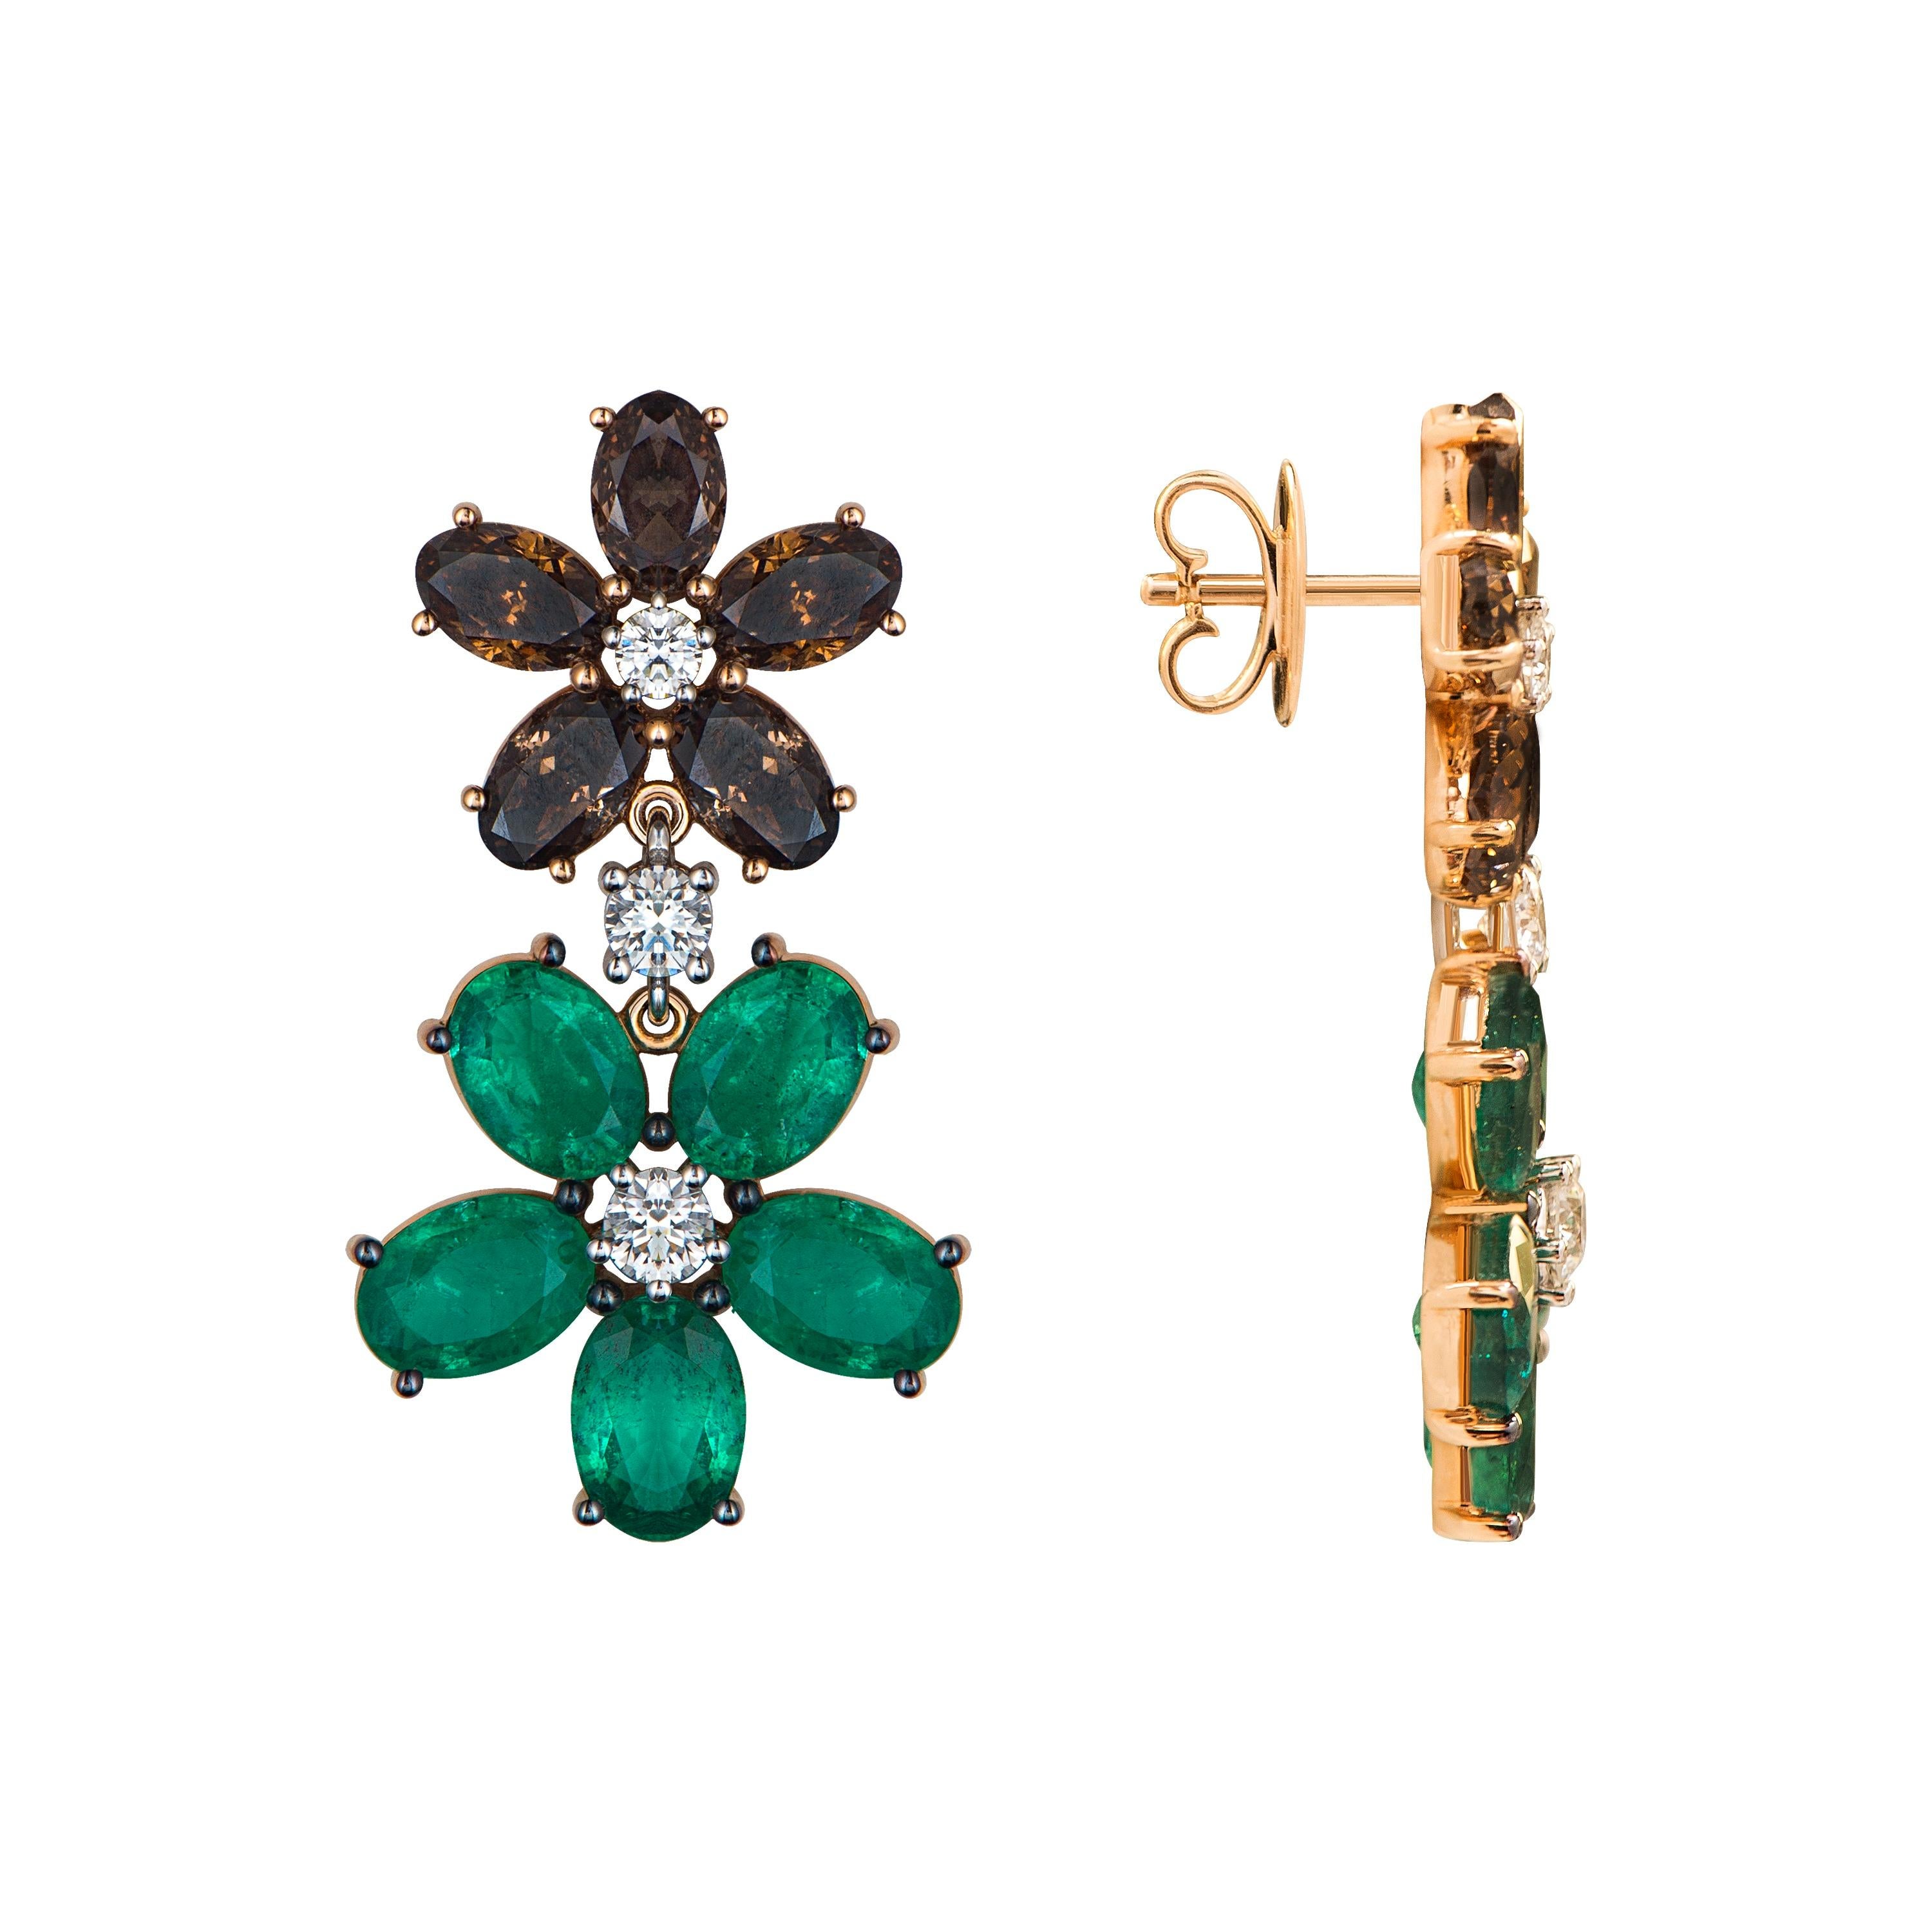 Brown diamonds and emeralds are in a harmonious match in this 18K rose gold blossom drop earrings. The upper flower is made up of five brown diamond 